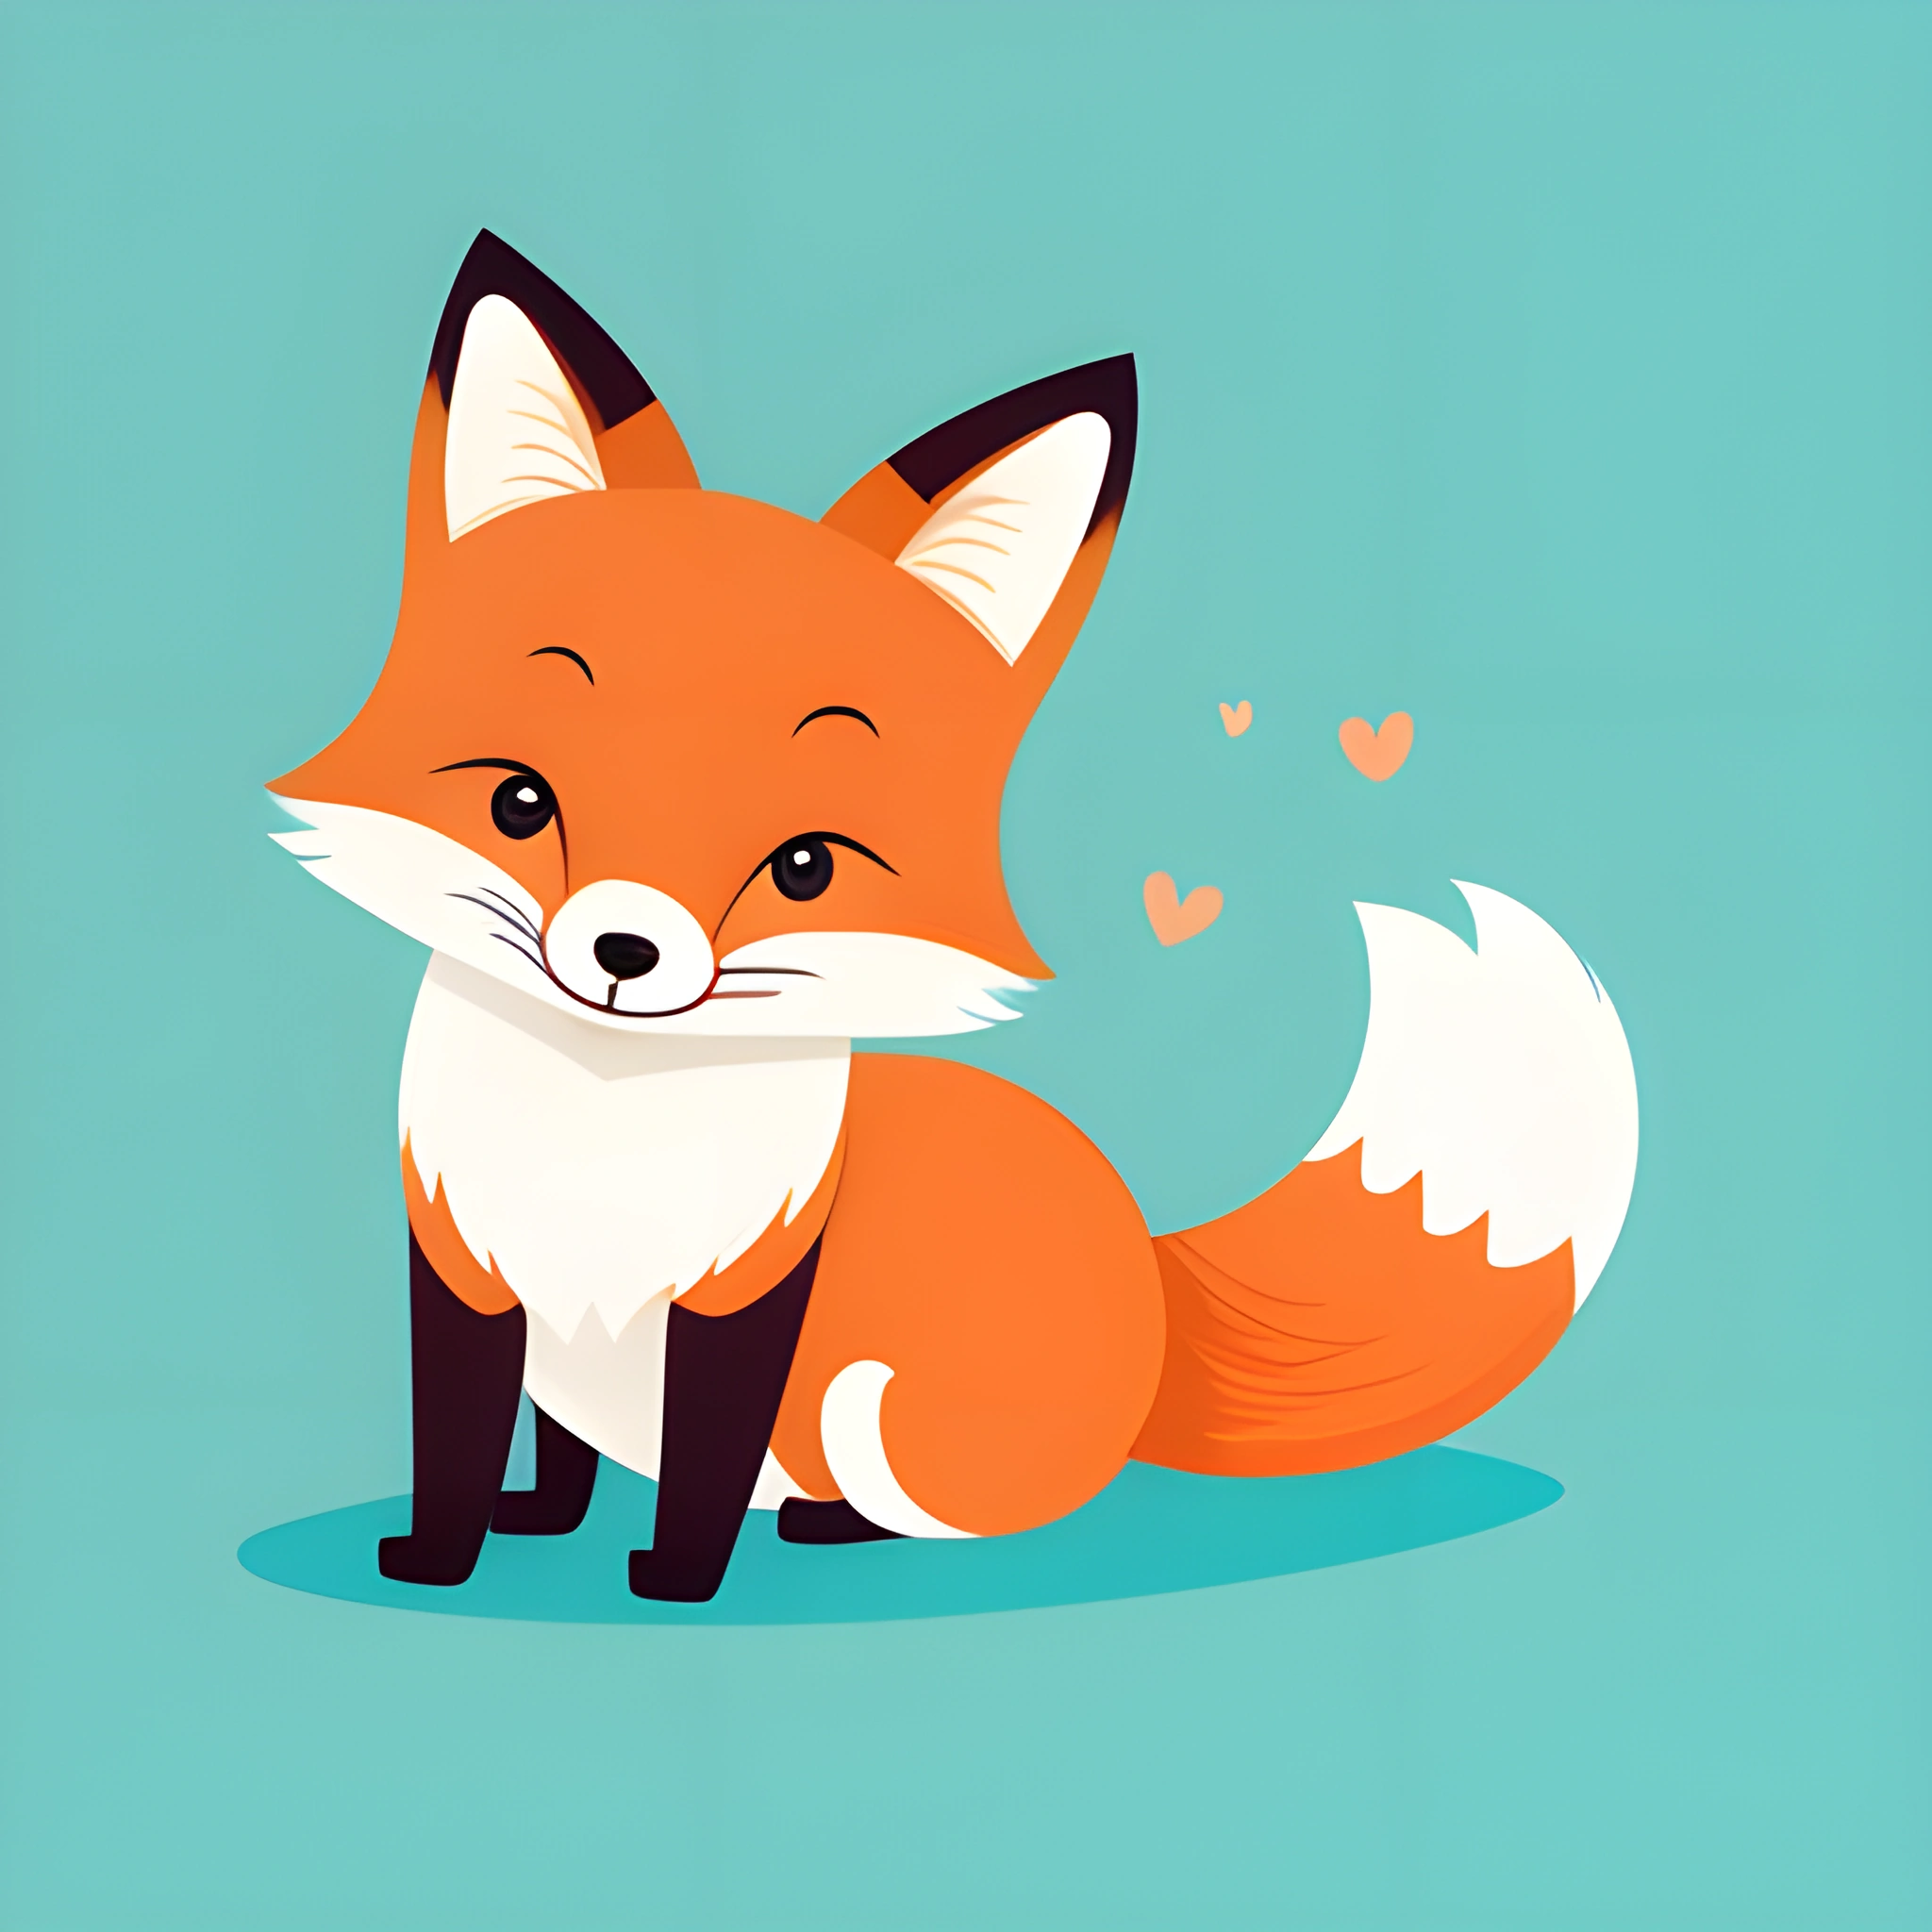 a cartoon fox that is sitting on the ground